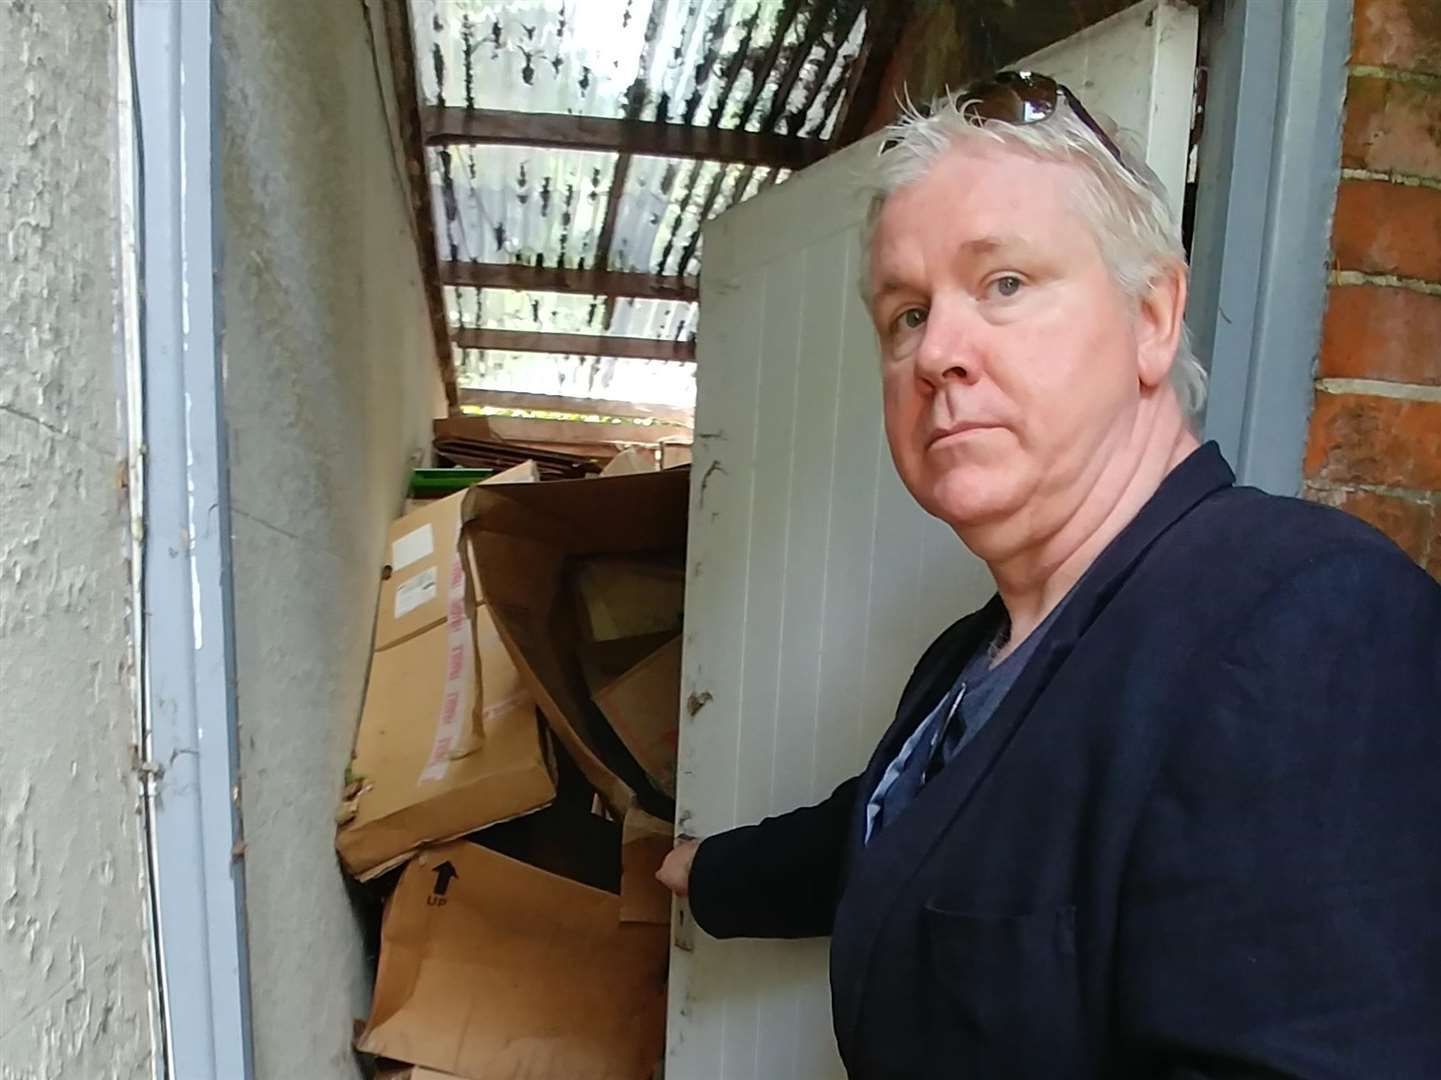 Landlord Chris Walsh claims the council will not help clear his waste